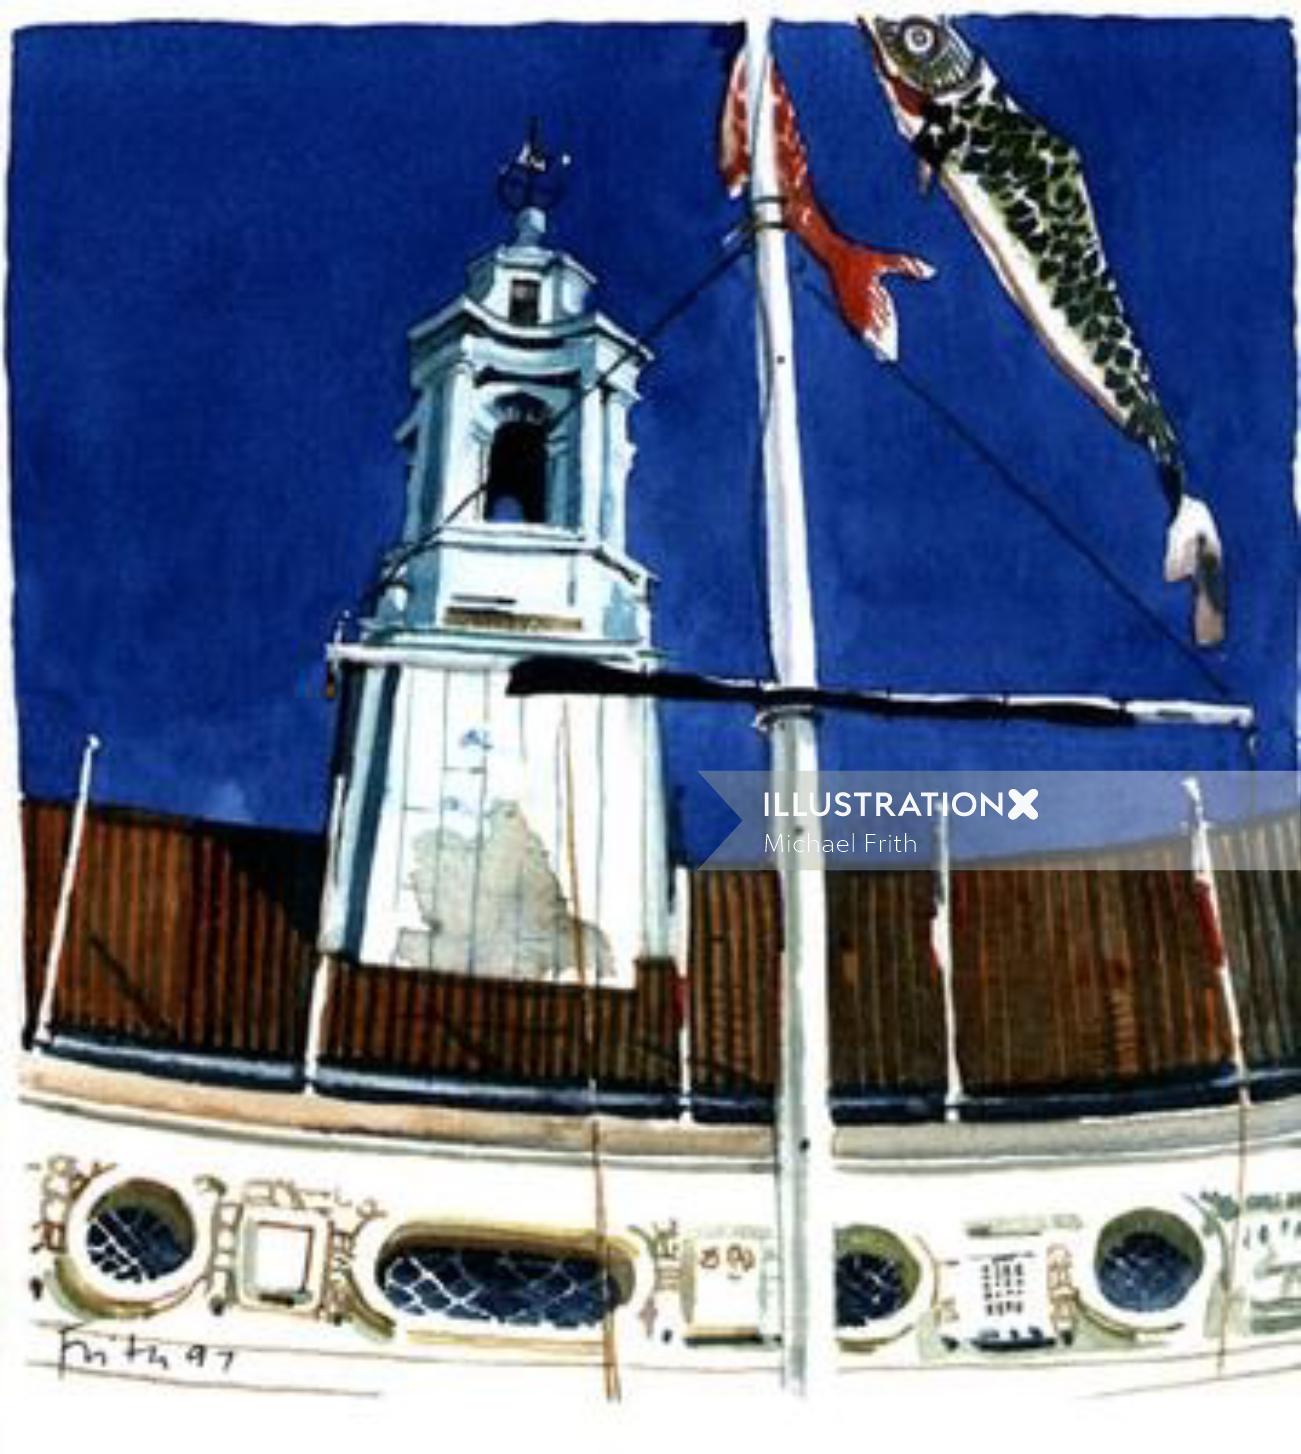 Oil painting of clock tower